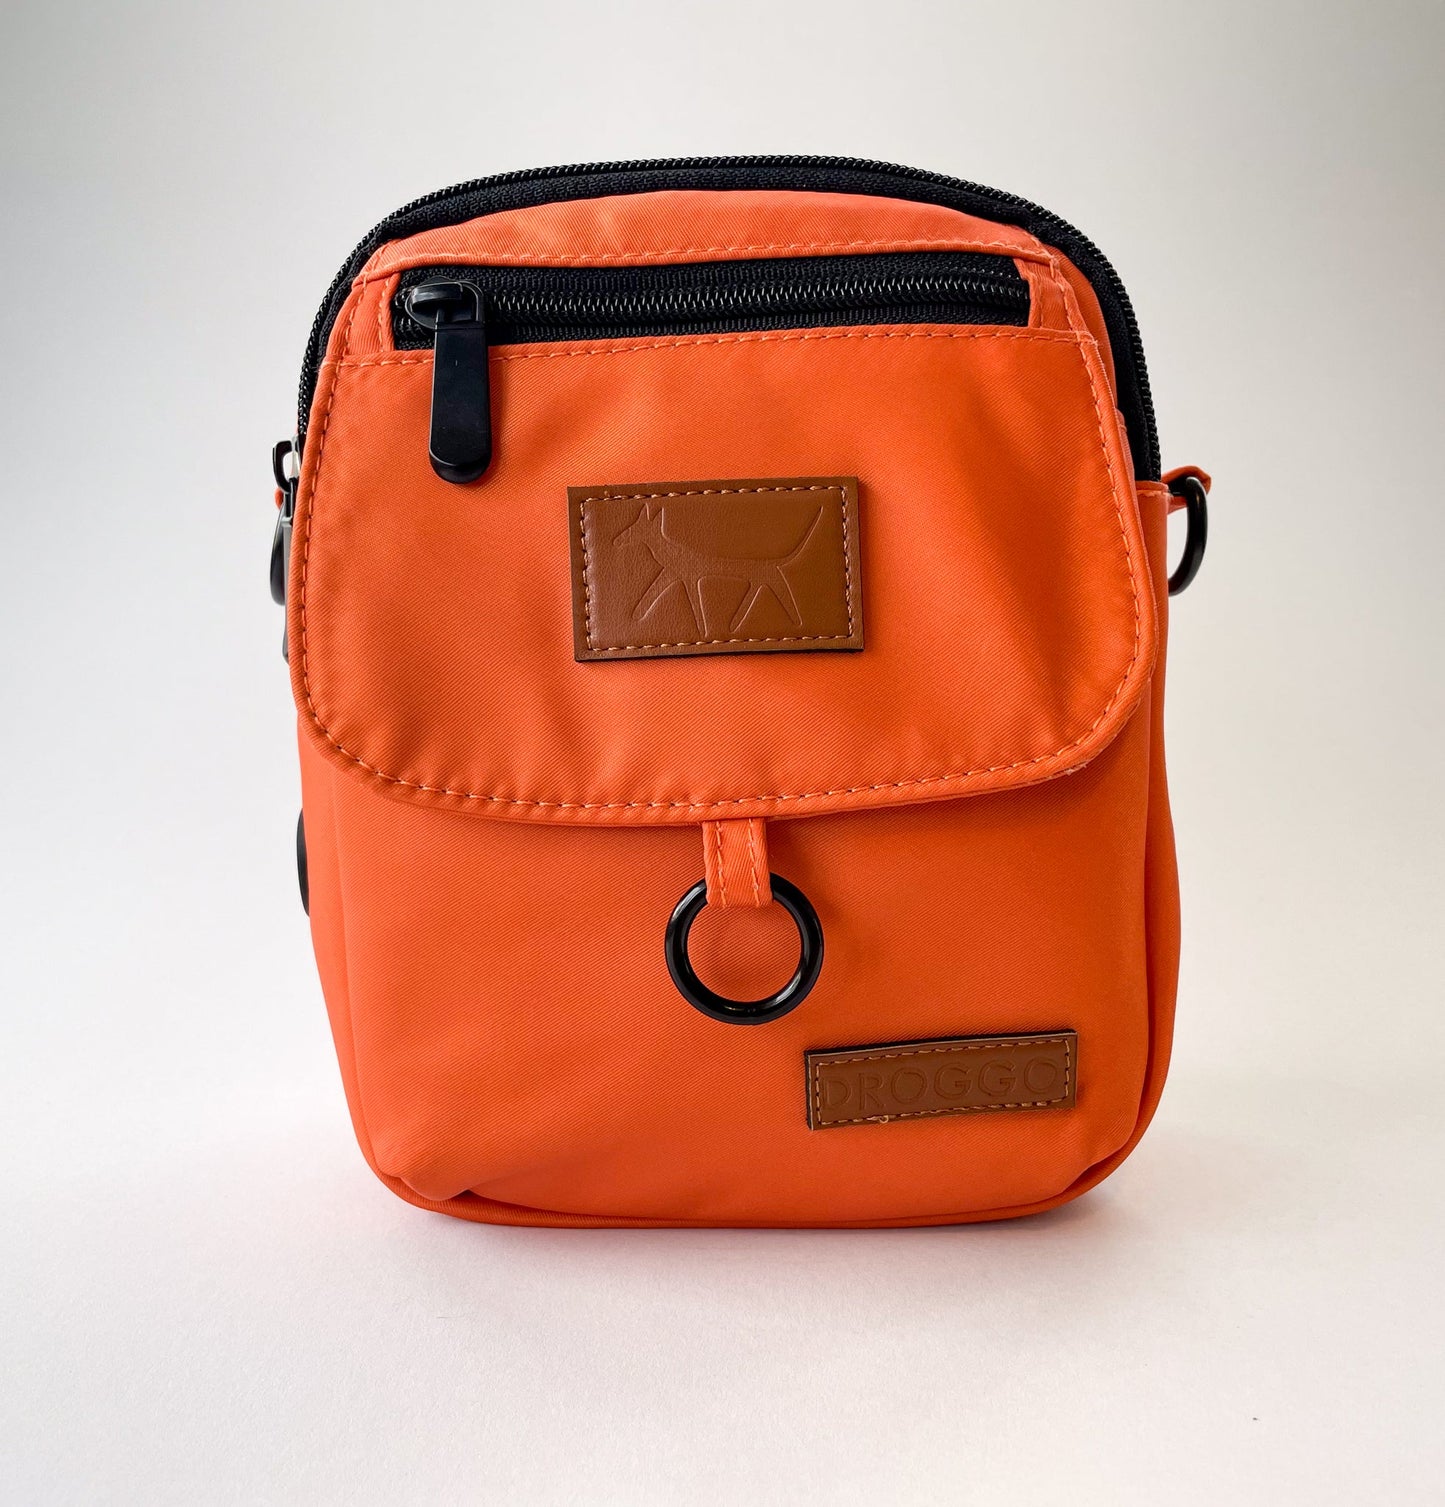 Front view of the walking bag in rust colour and leather Droggo logos. White background.